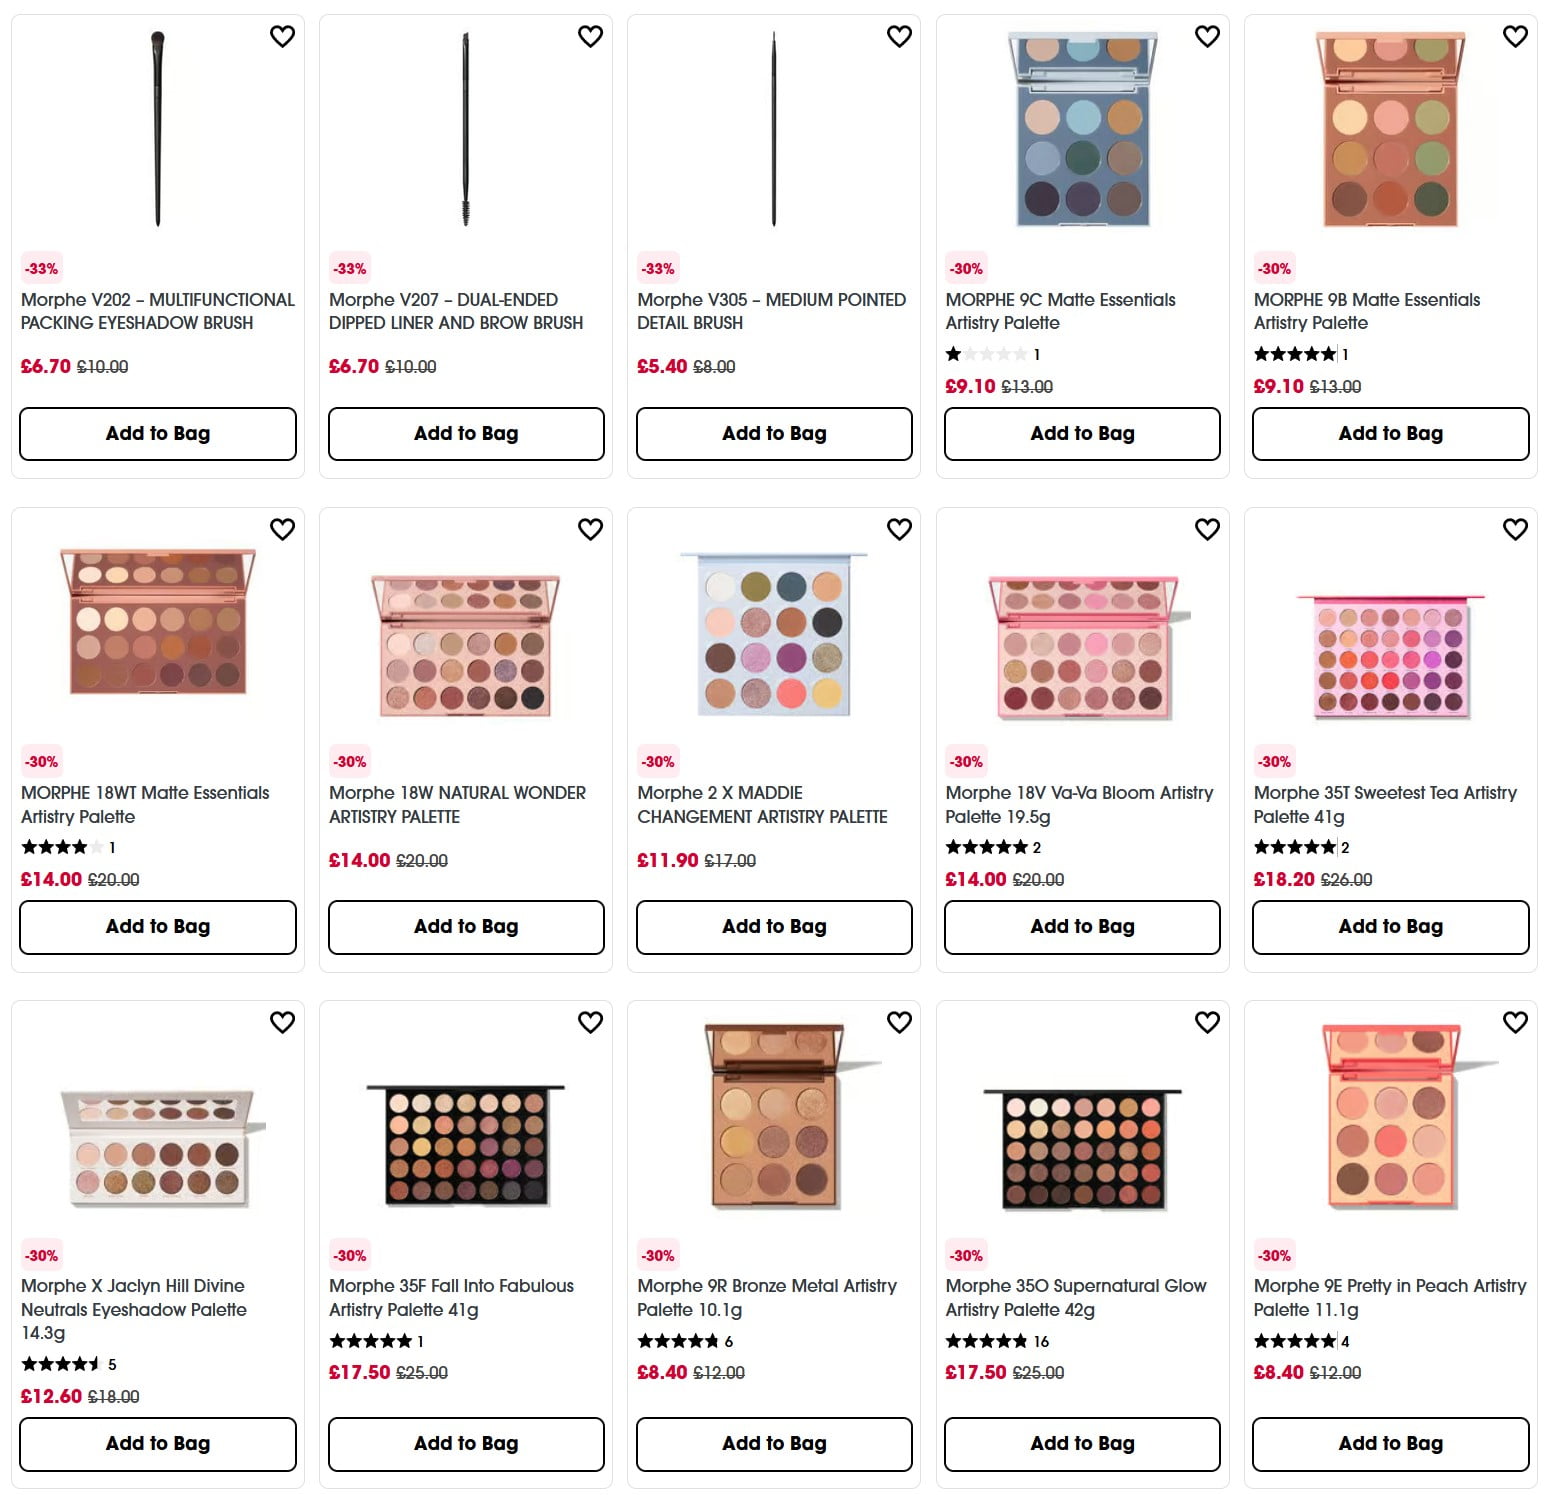 Up to 33% off Morphe at Sephora UK